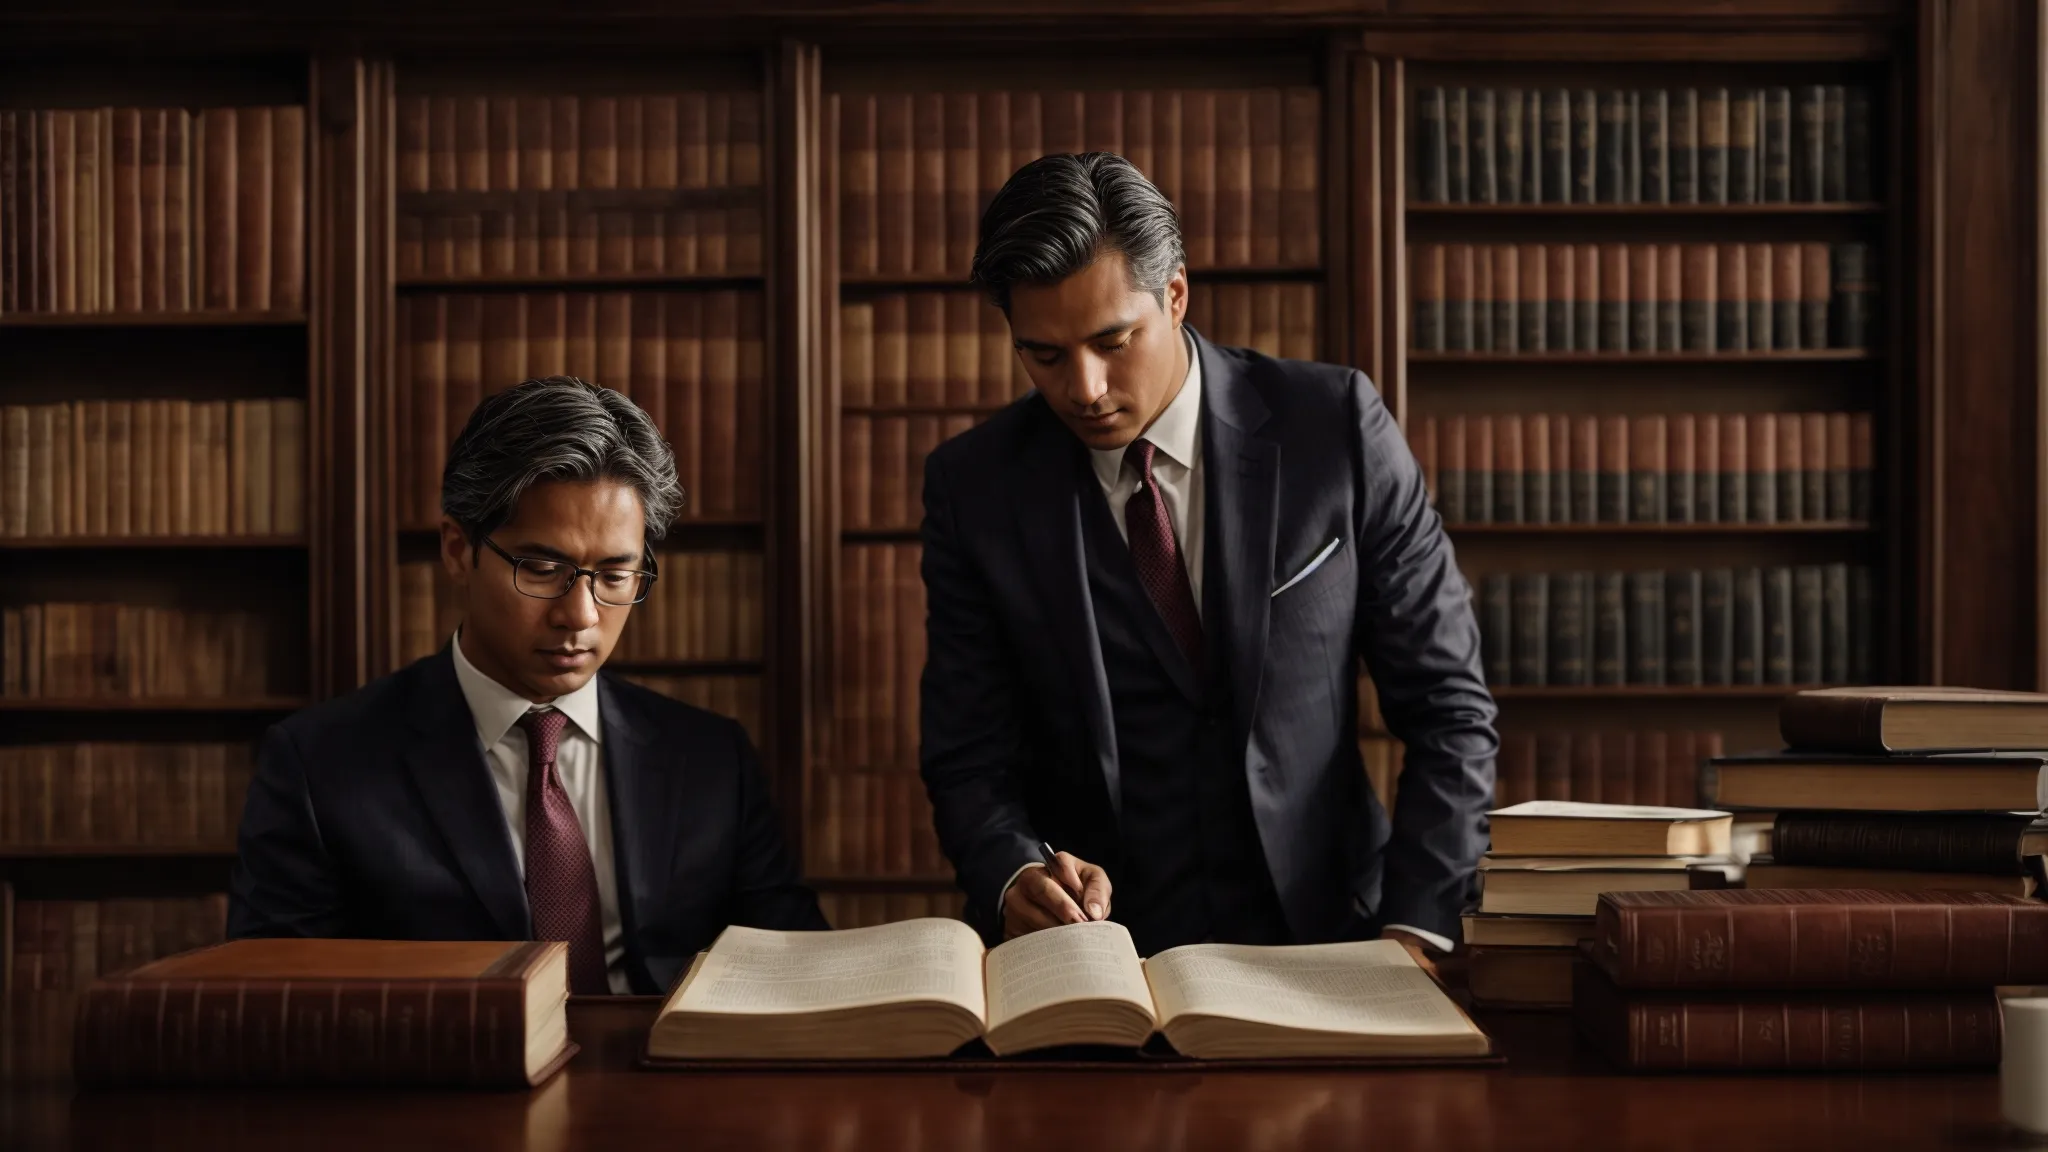 two attorneys are engaged in a thoughtful discussion in a law library, surrounded by volumes of legal tomes relevant to international arbitration concerning lex contractus